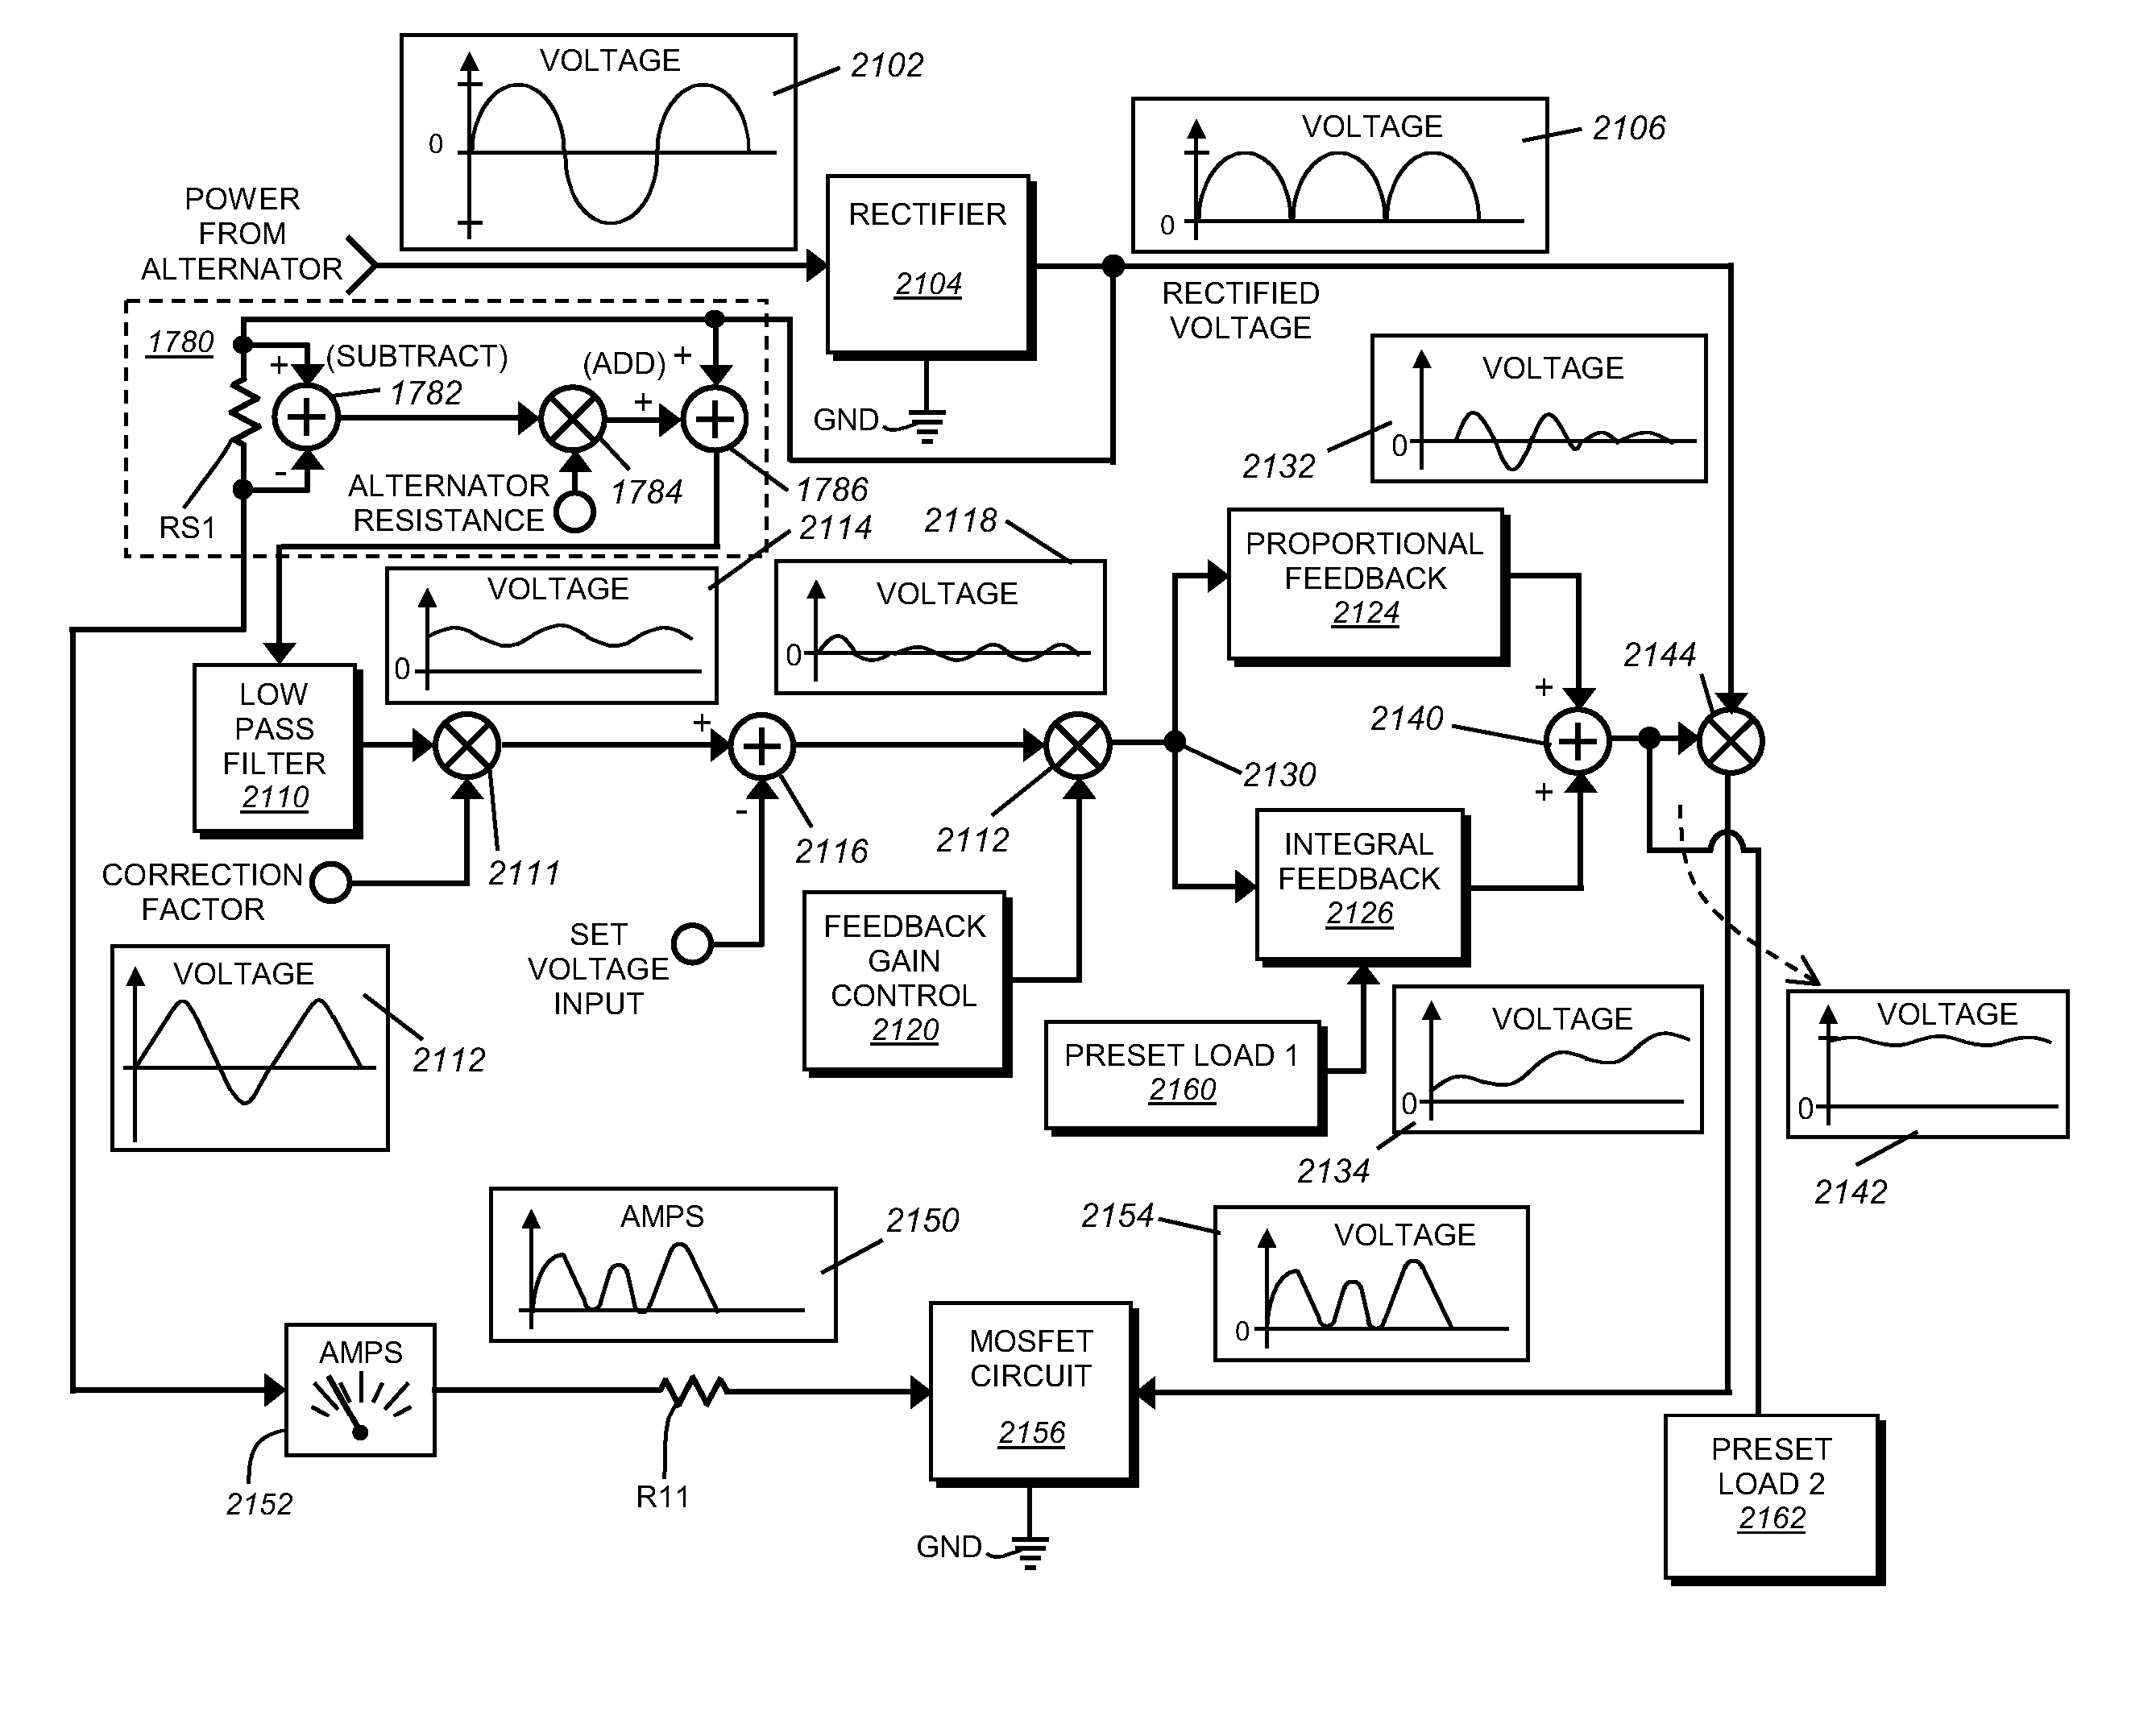 System and method for controlling a power generating system